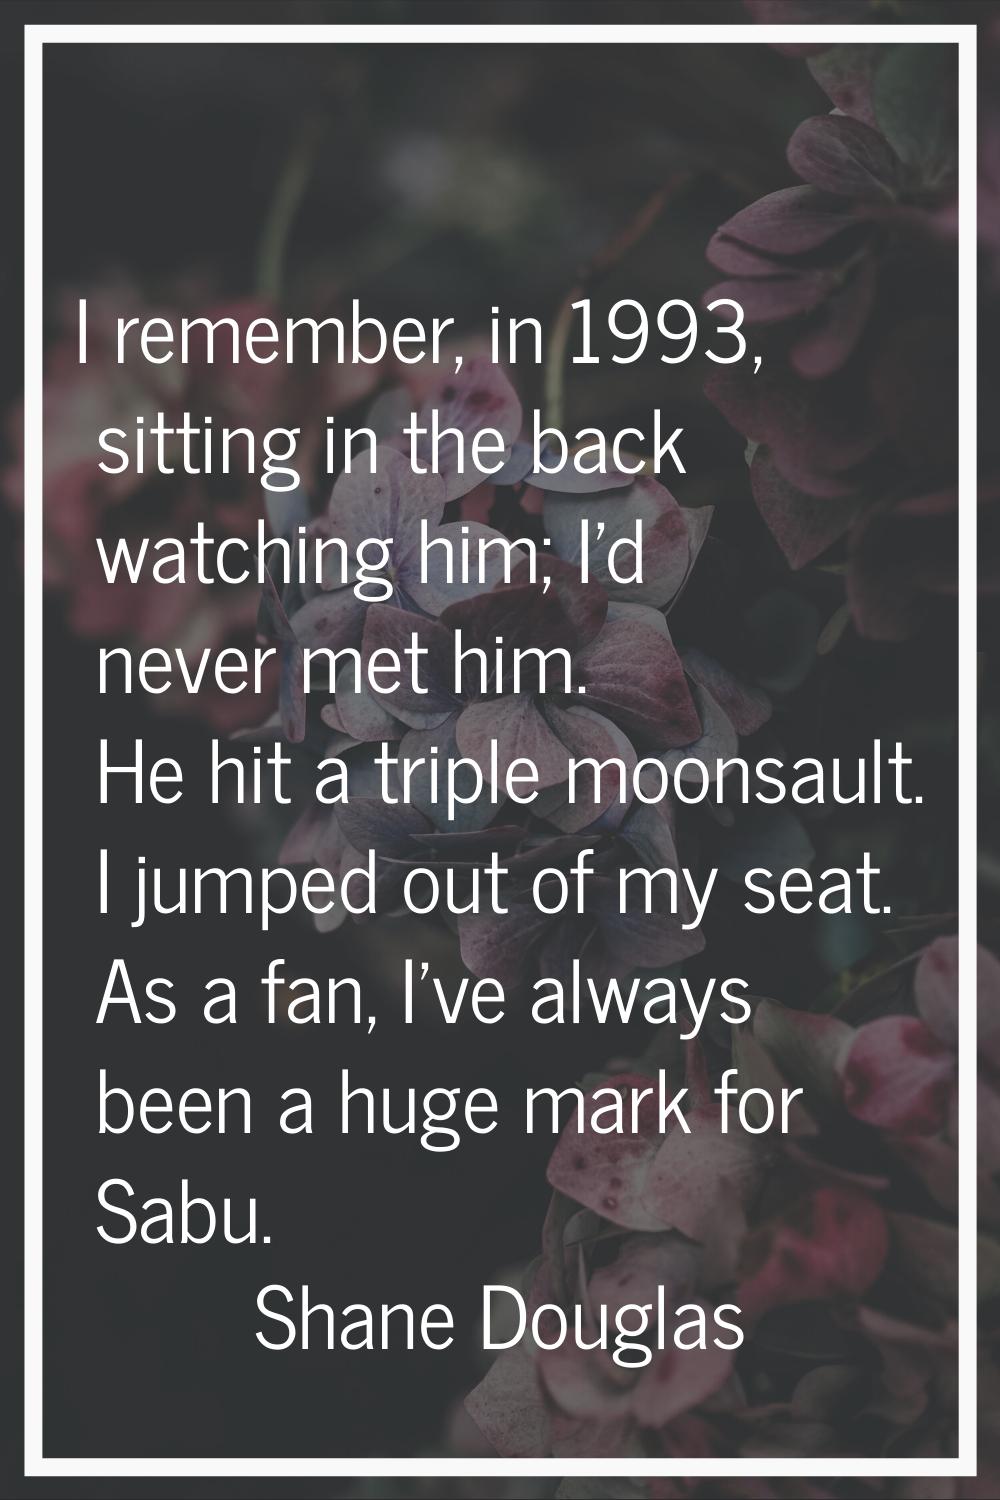 I remember, in 1993, sitting in the back watching him; I'd never met him. He hit a triple moonsault